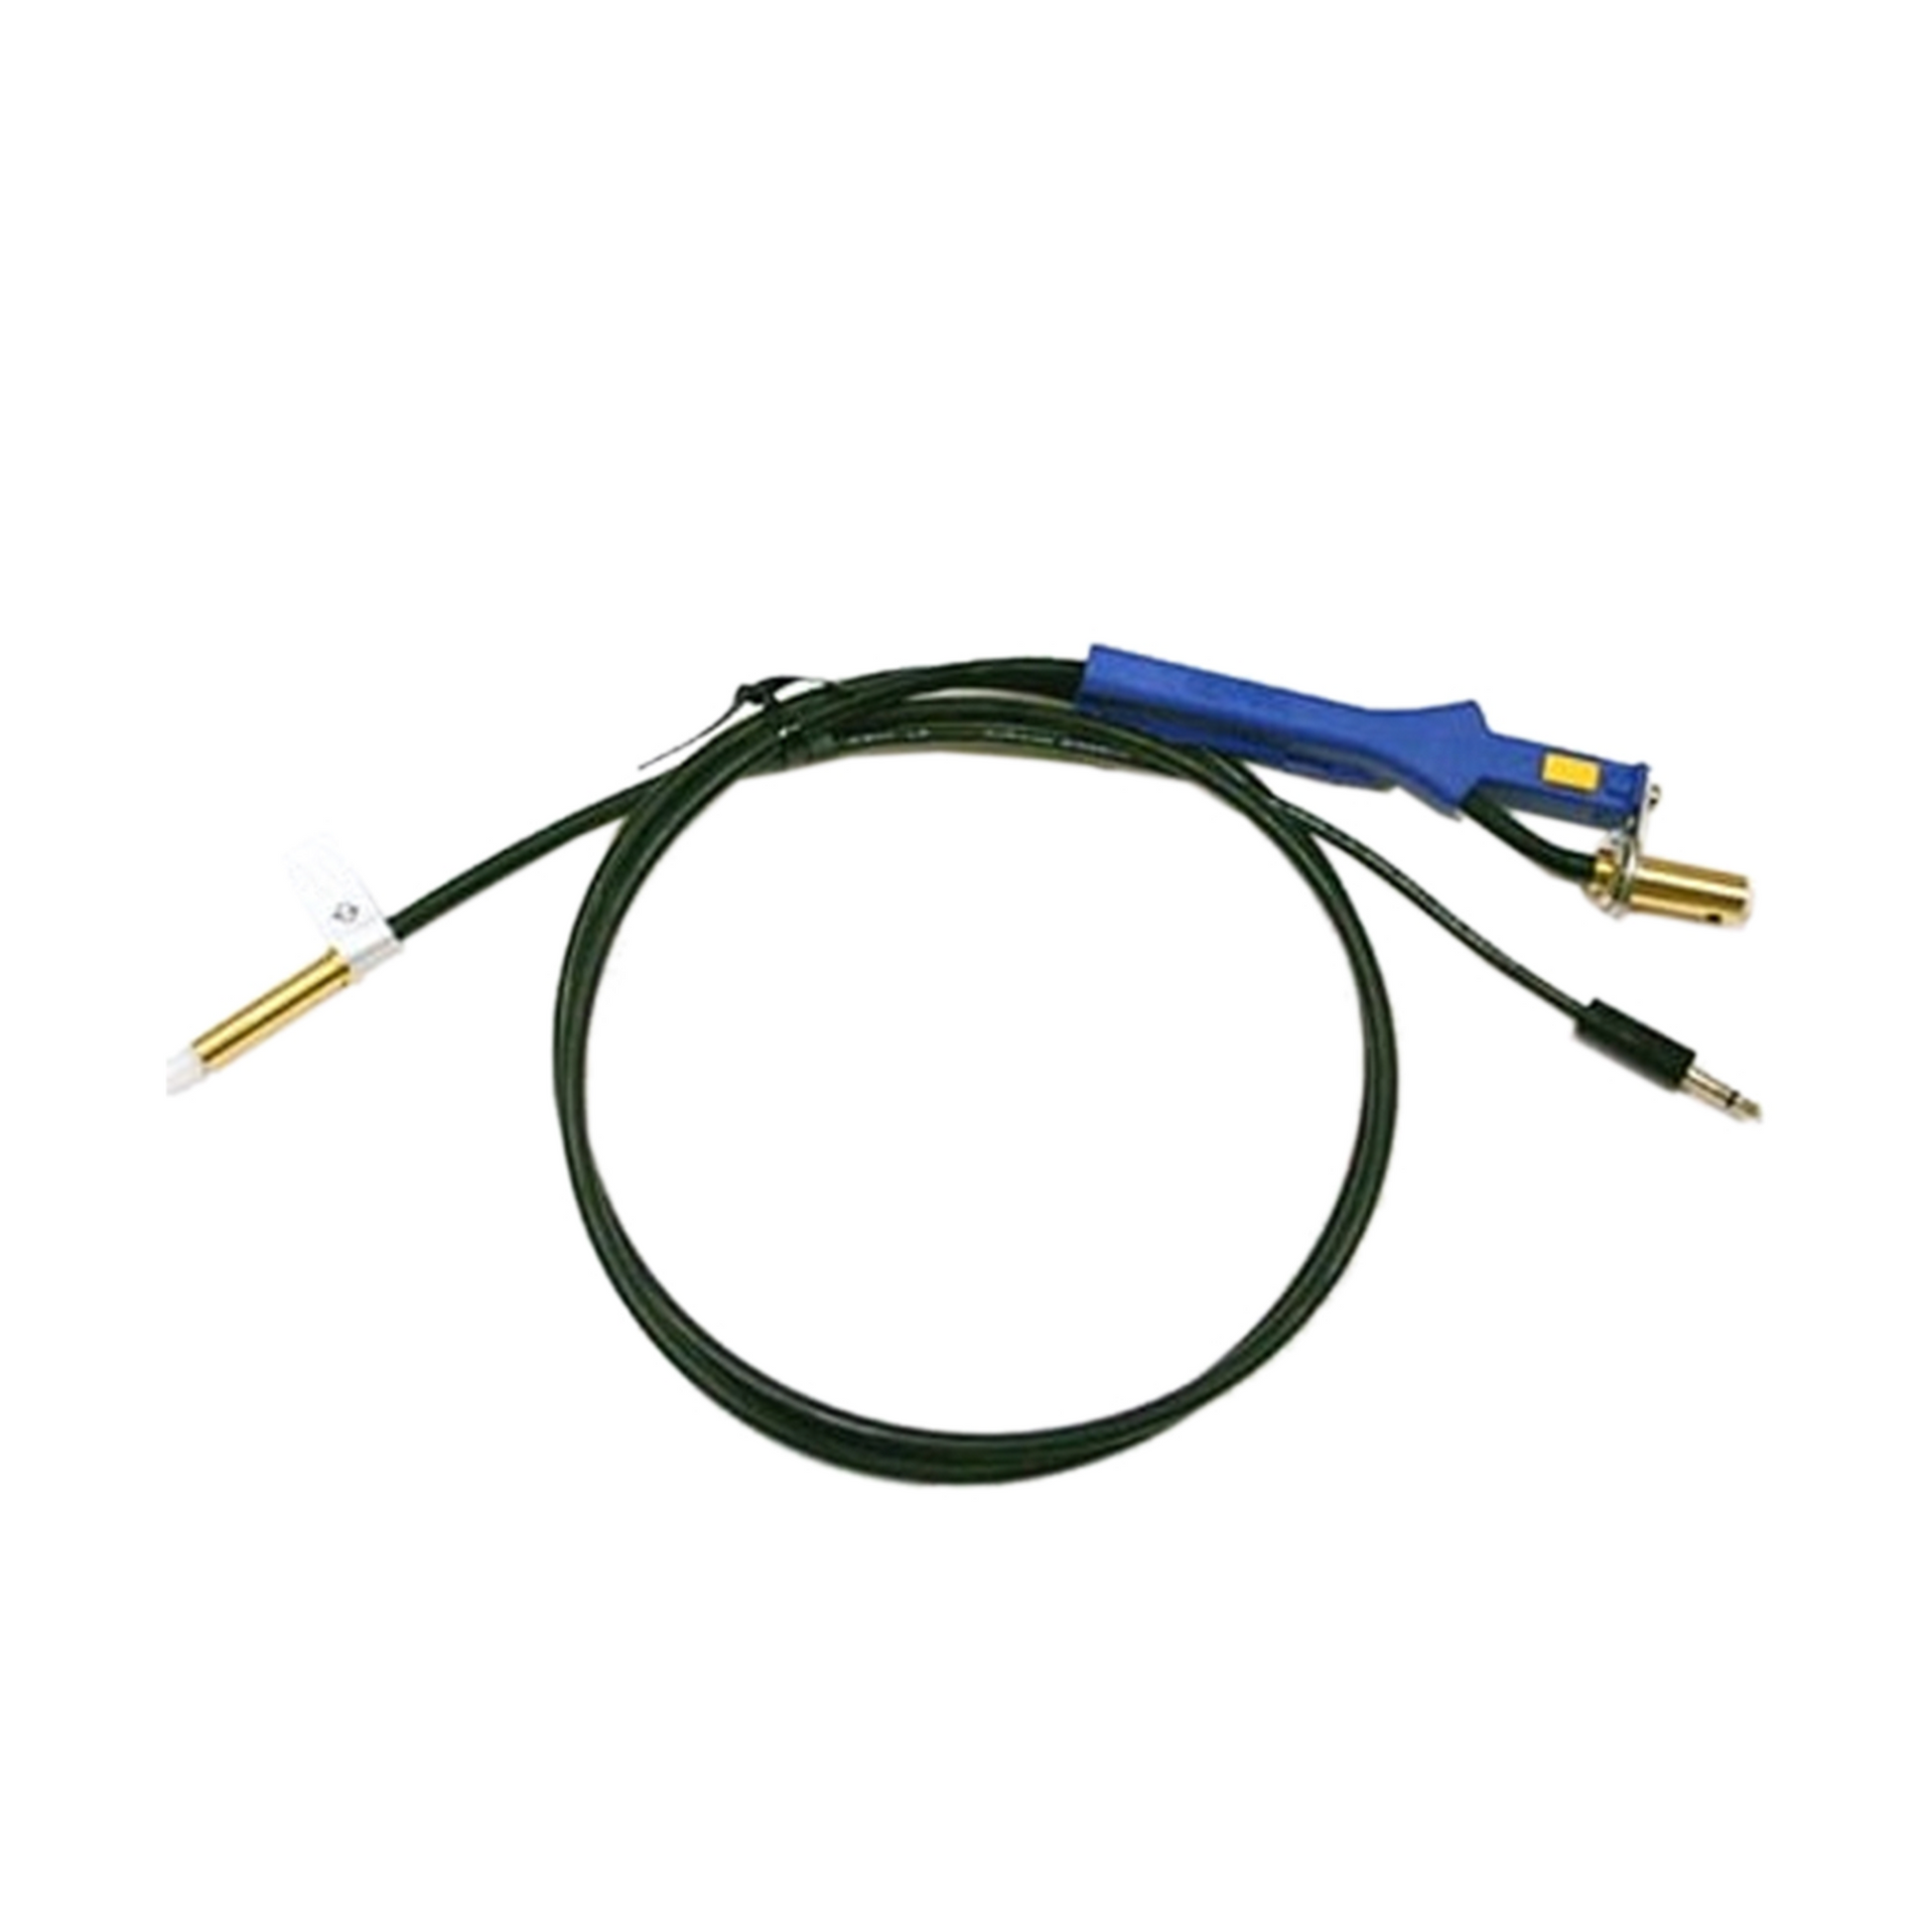 Hakko Products_ B3481 Guide Pipe Assembly 0.6mm_ Soldering Accessories_ Hakko Products